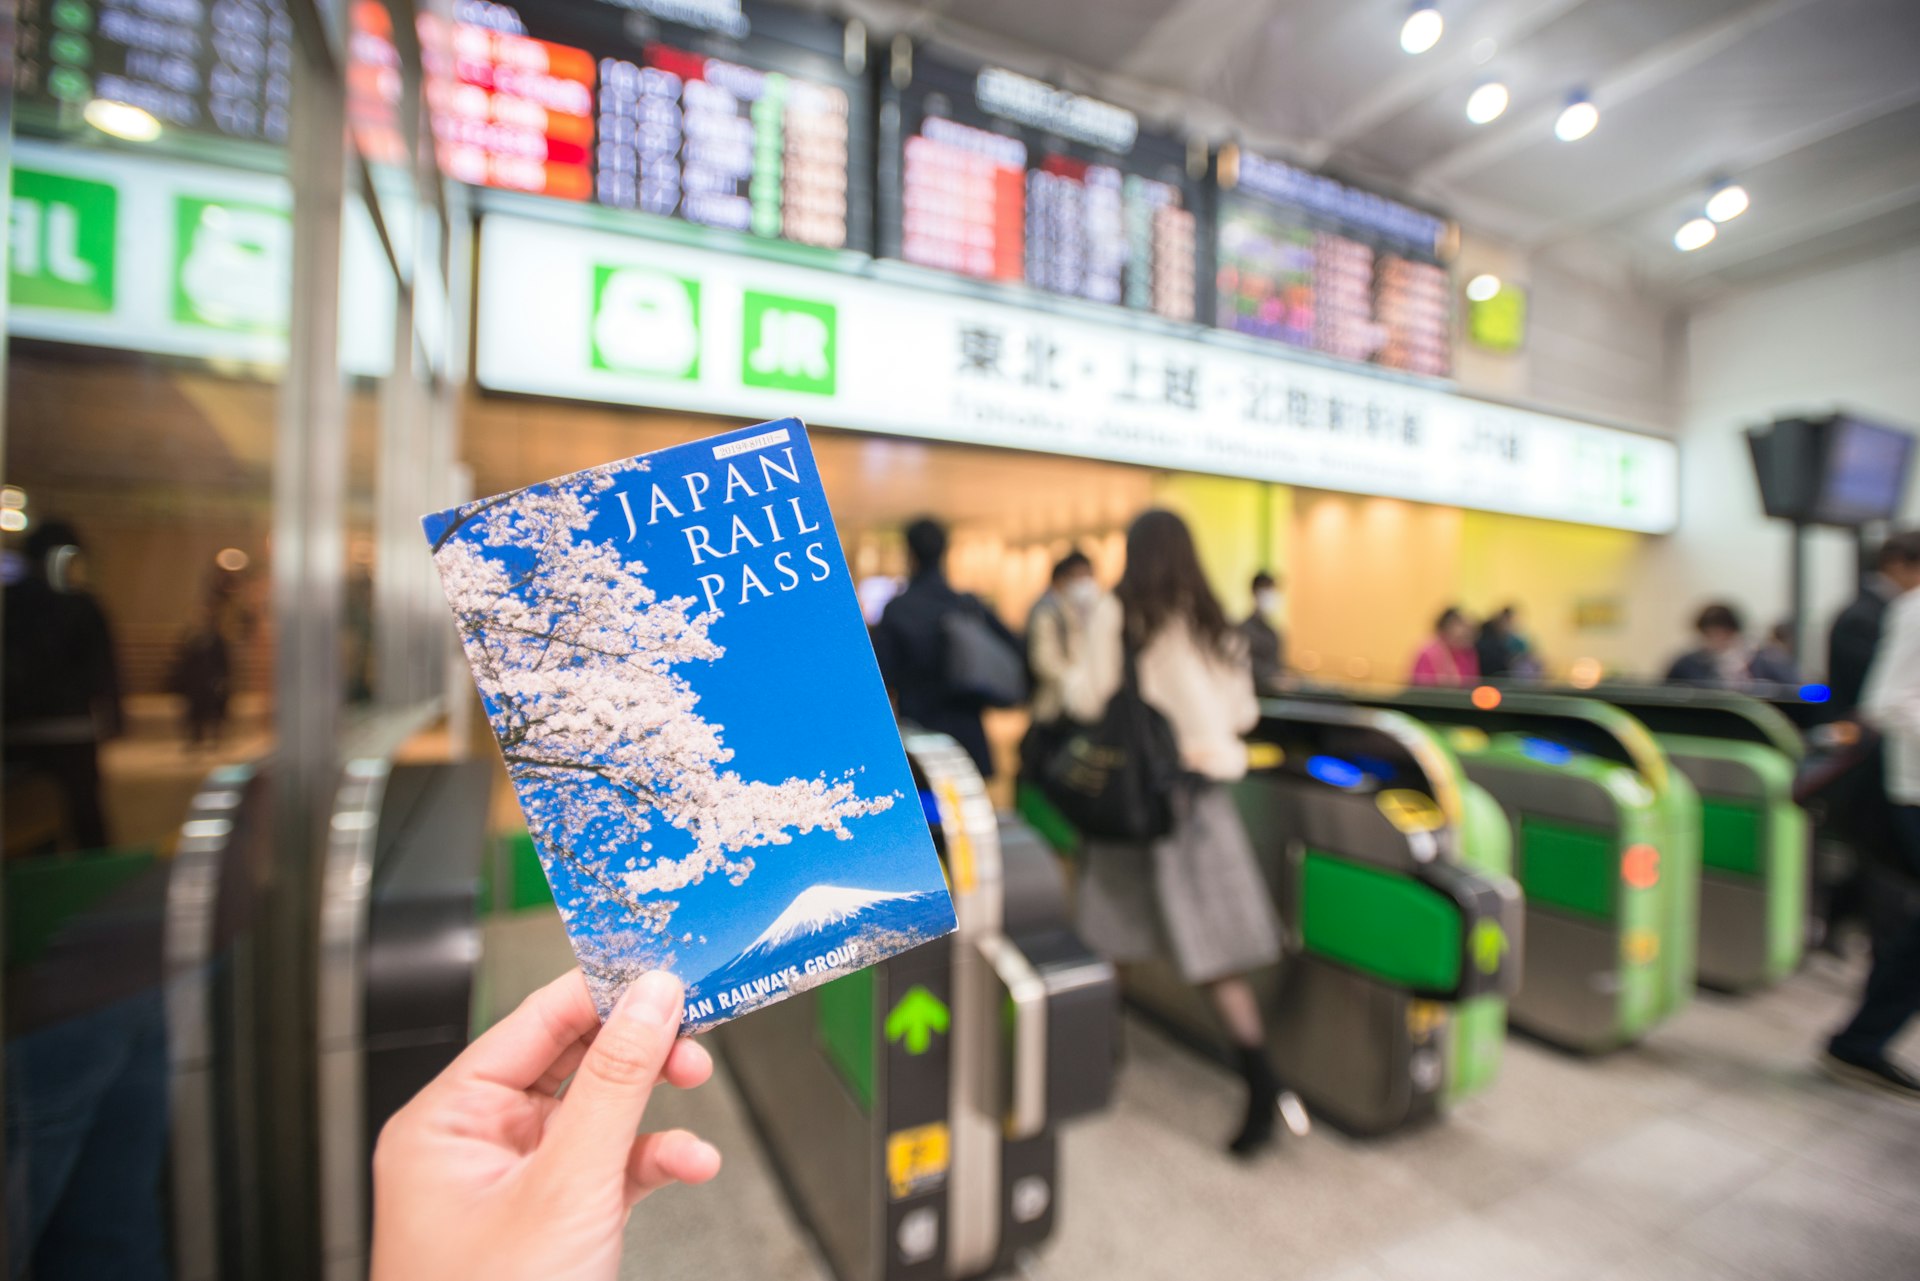 A hand holds up a passport-sized document labeled as Japan Rail Pass in front of barriers at a Japanese train station